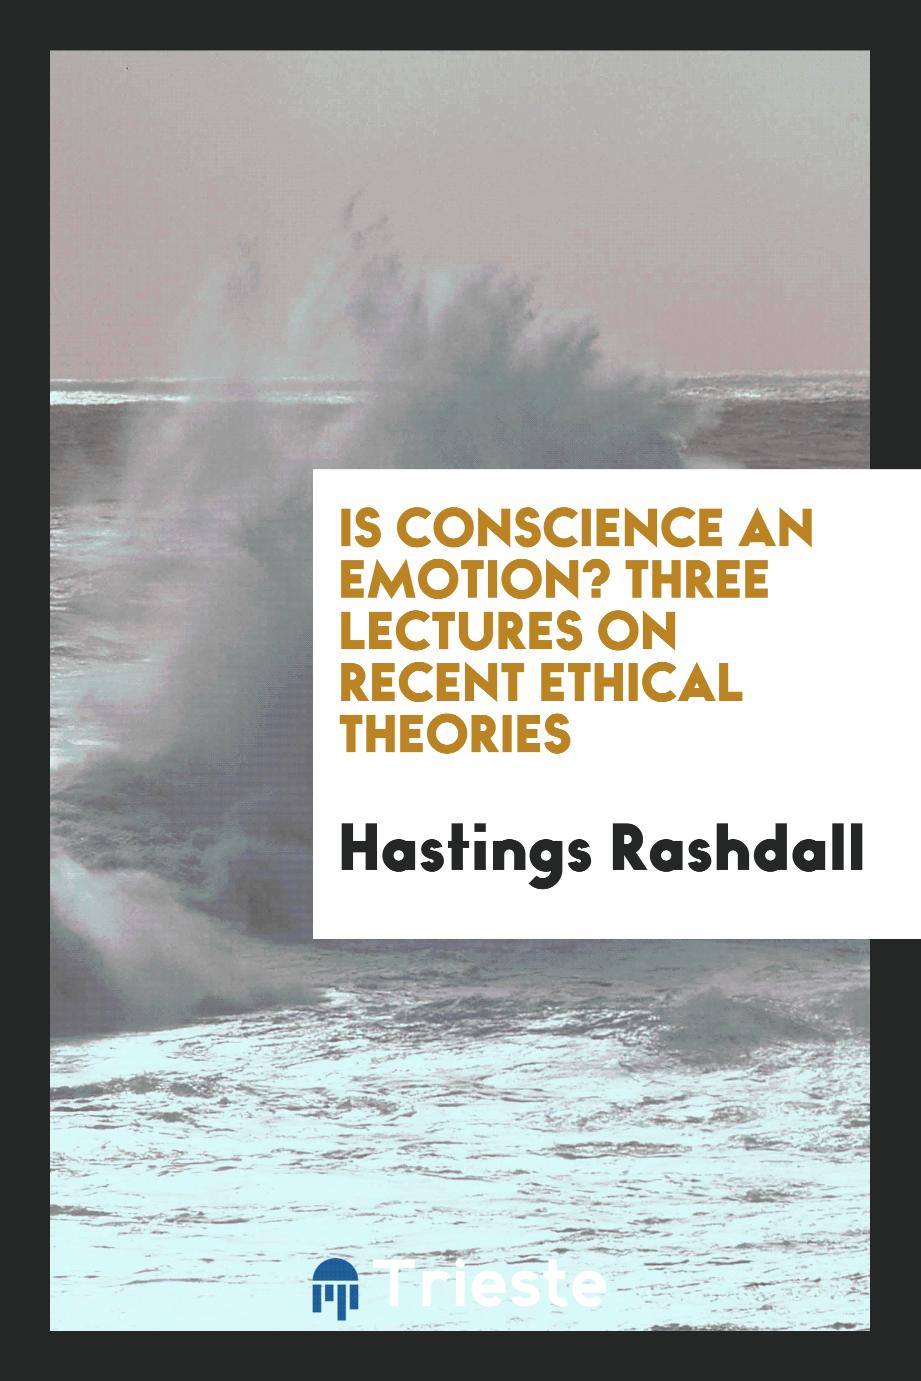 Is conscience an emotion? Three lectures on recent ethical theories